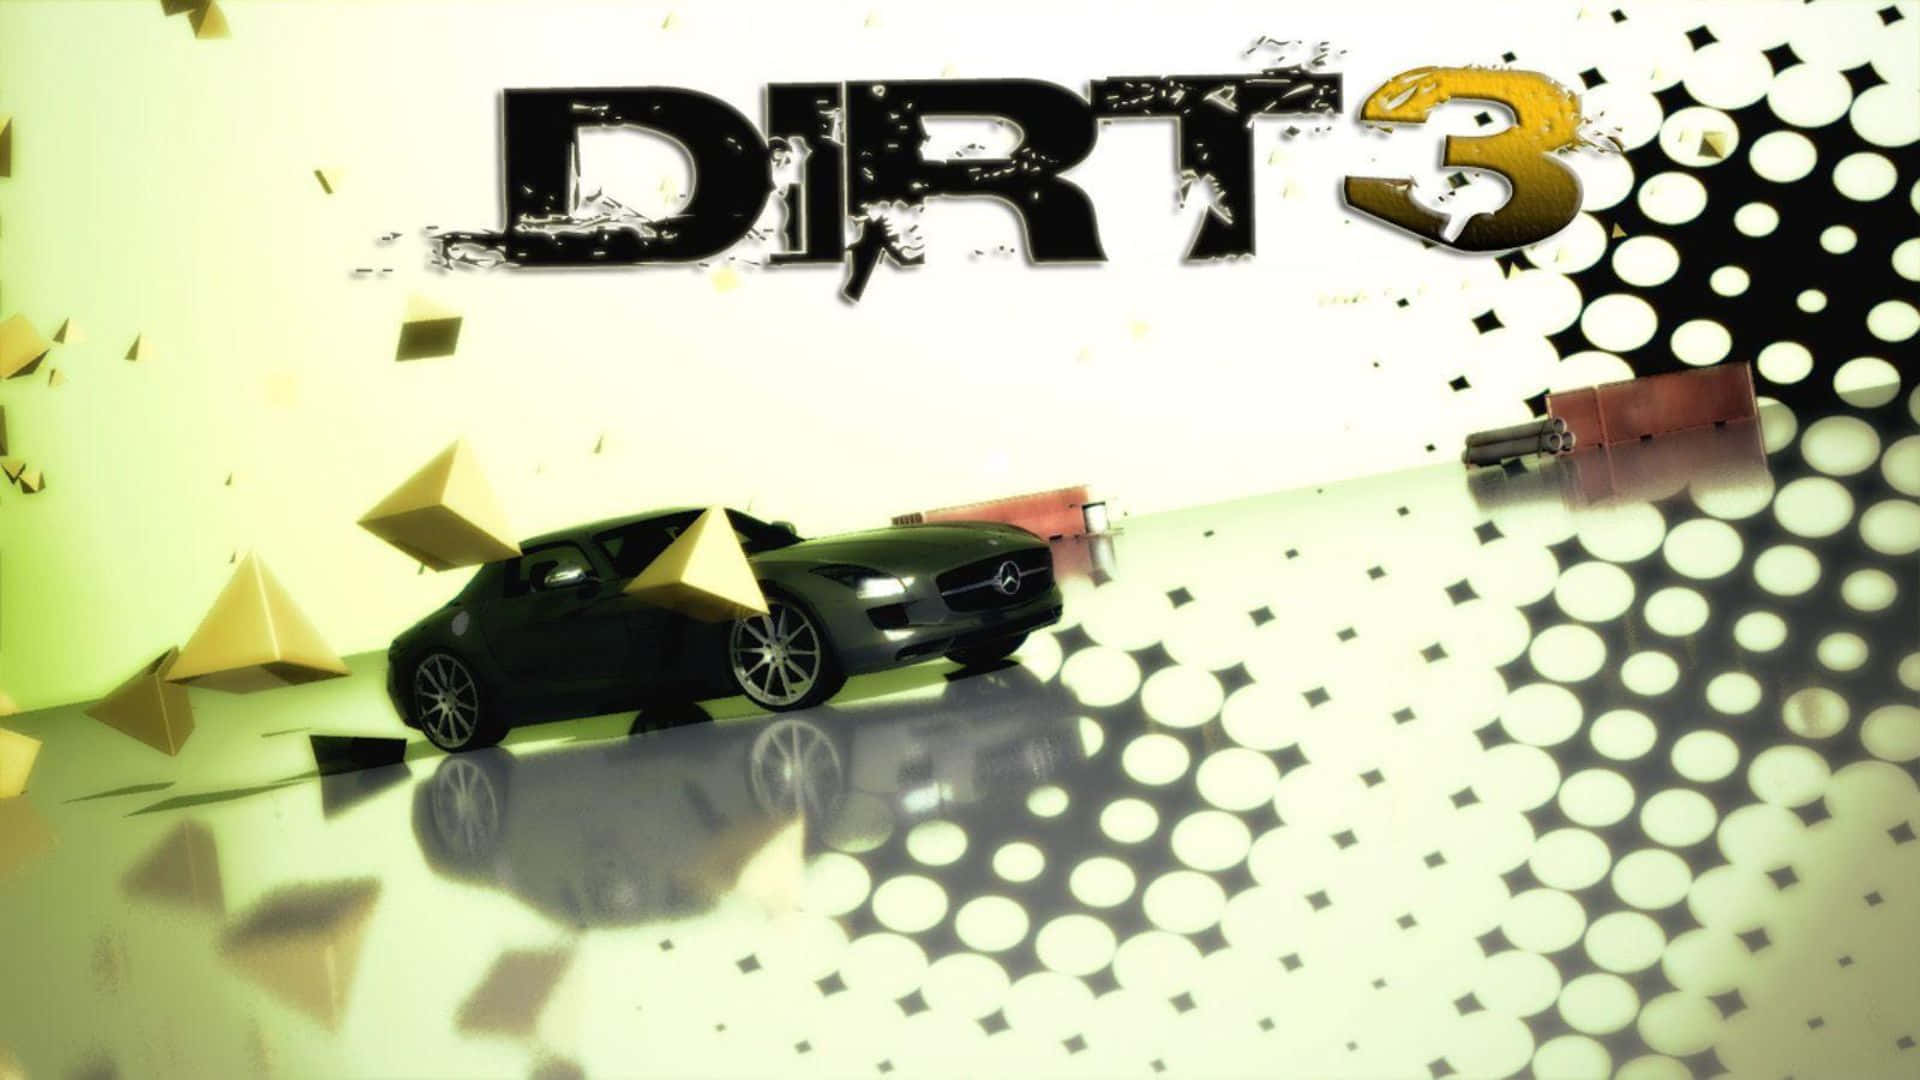 Speed your way through the course in Dirt 3